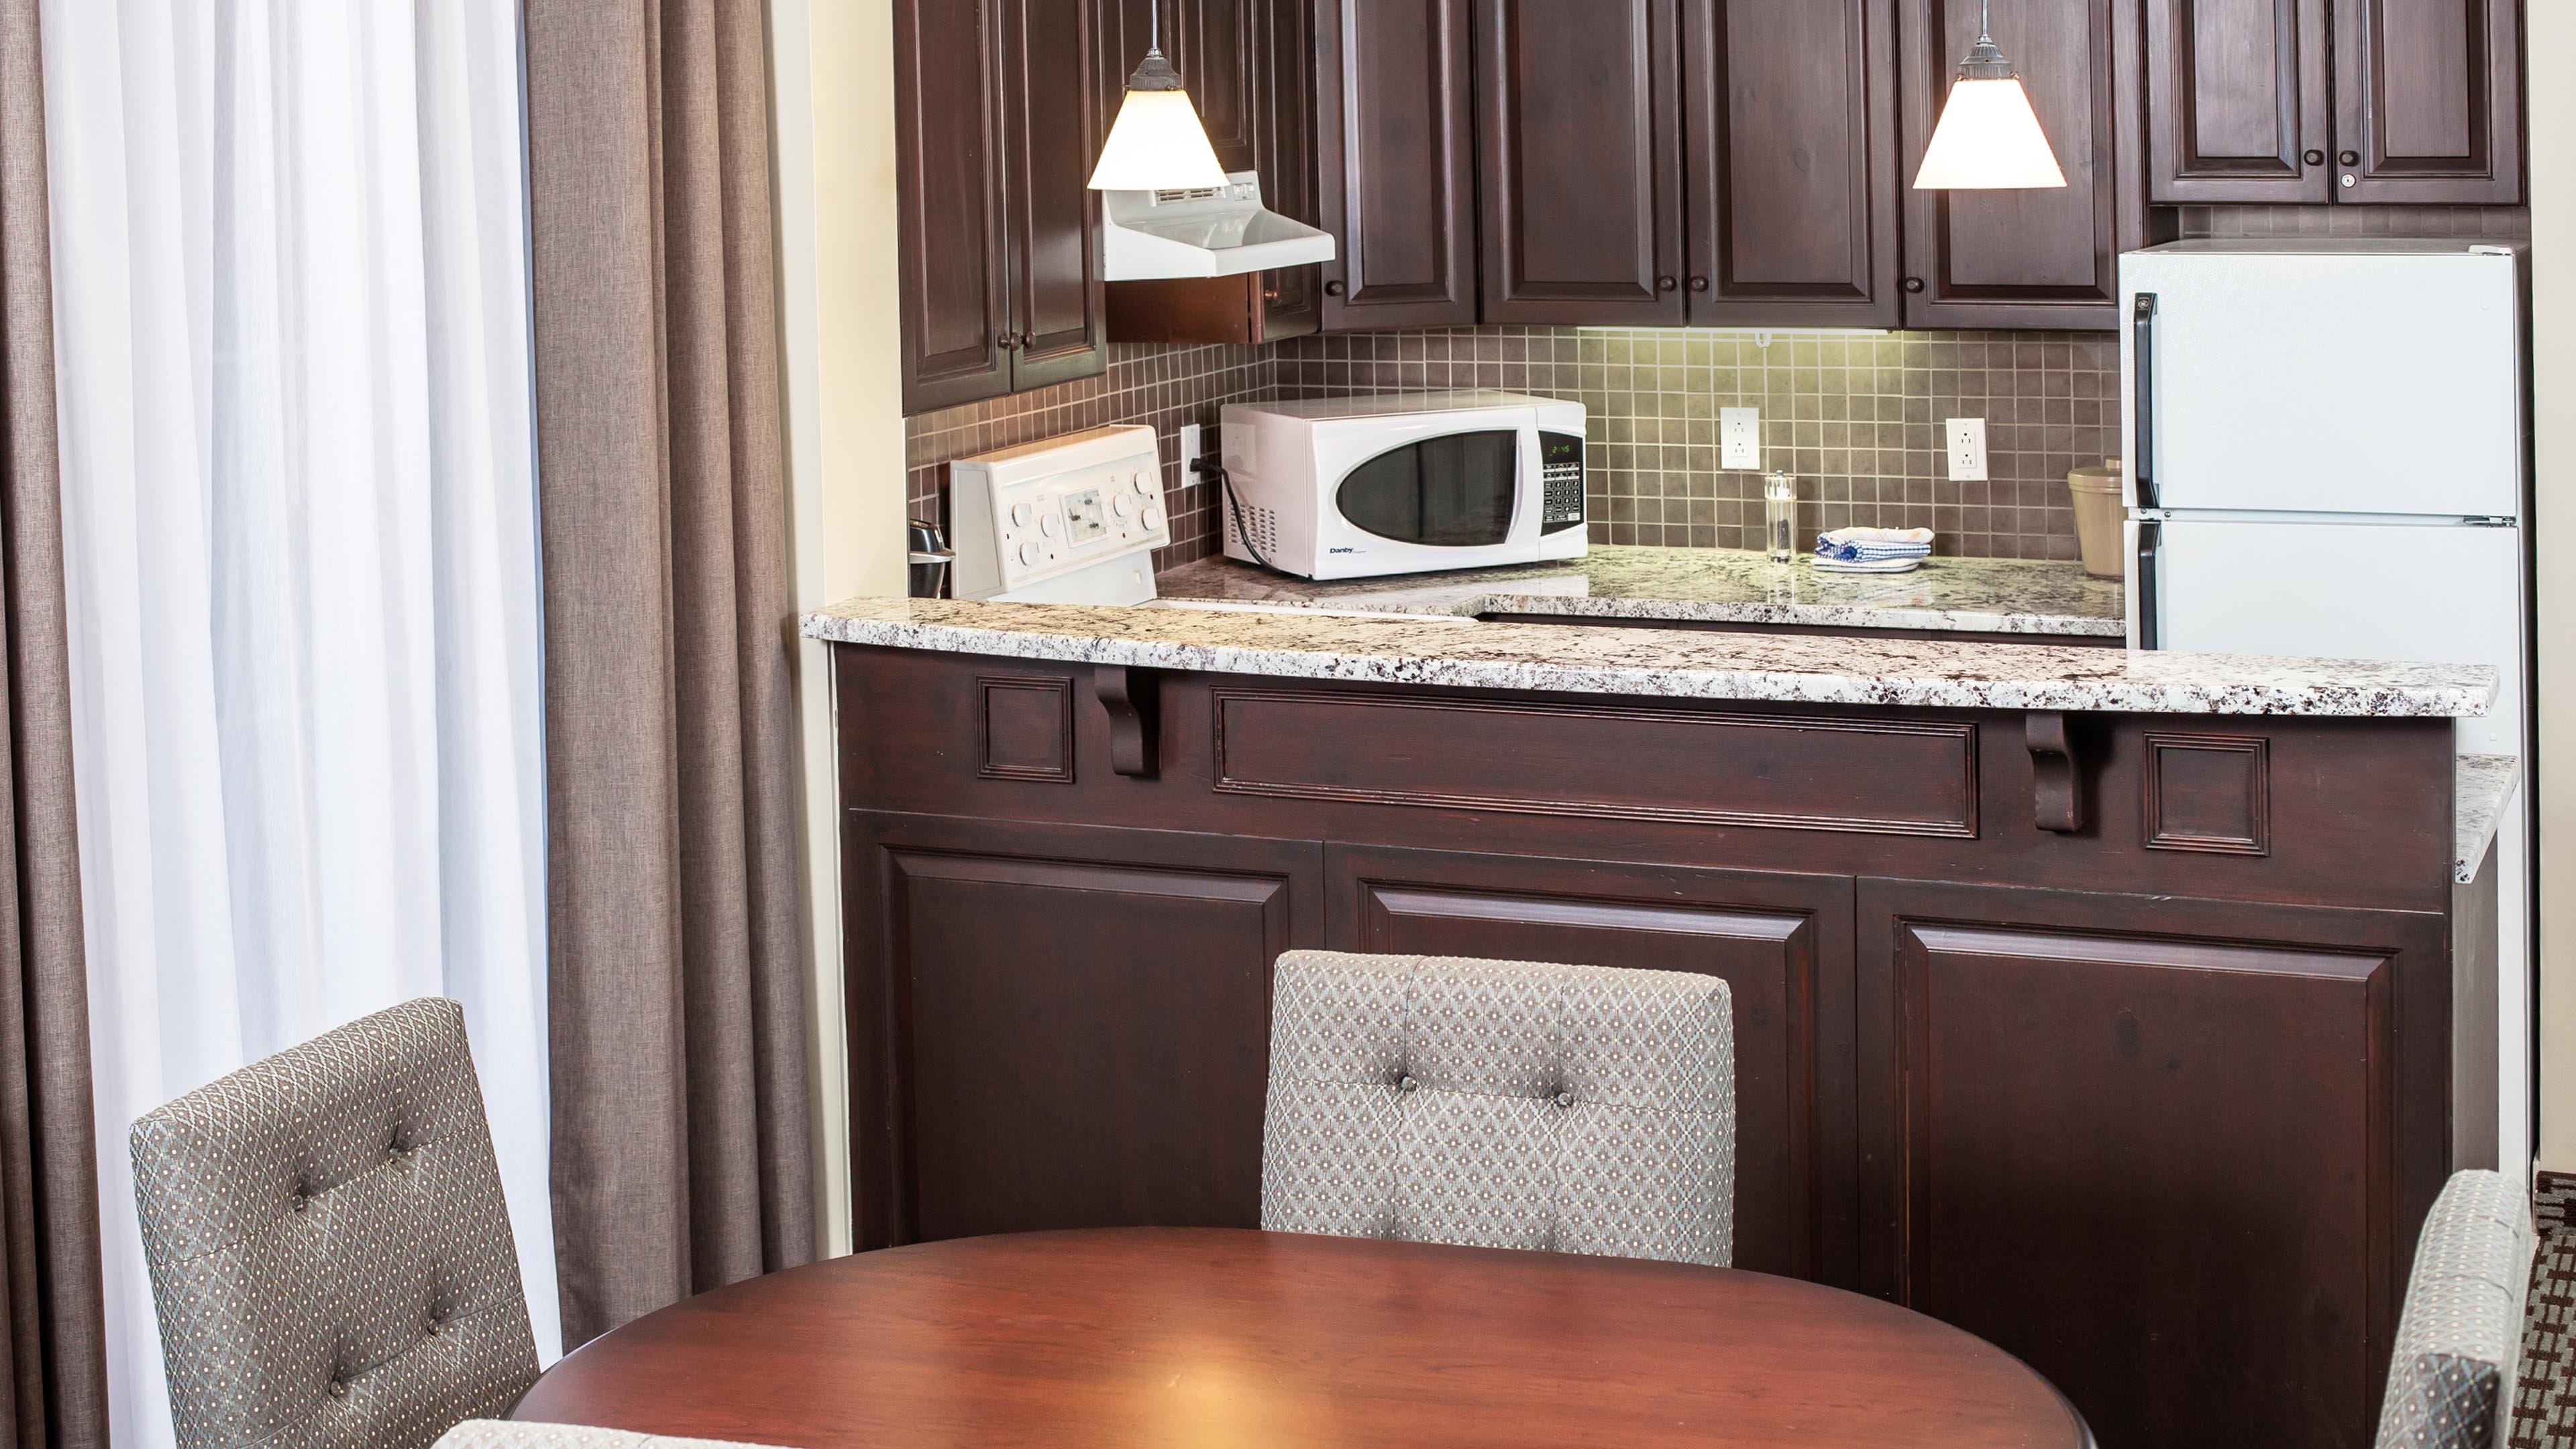 Suite features kitchen and dining area.